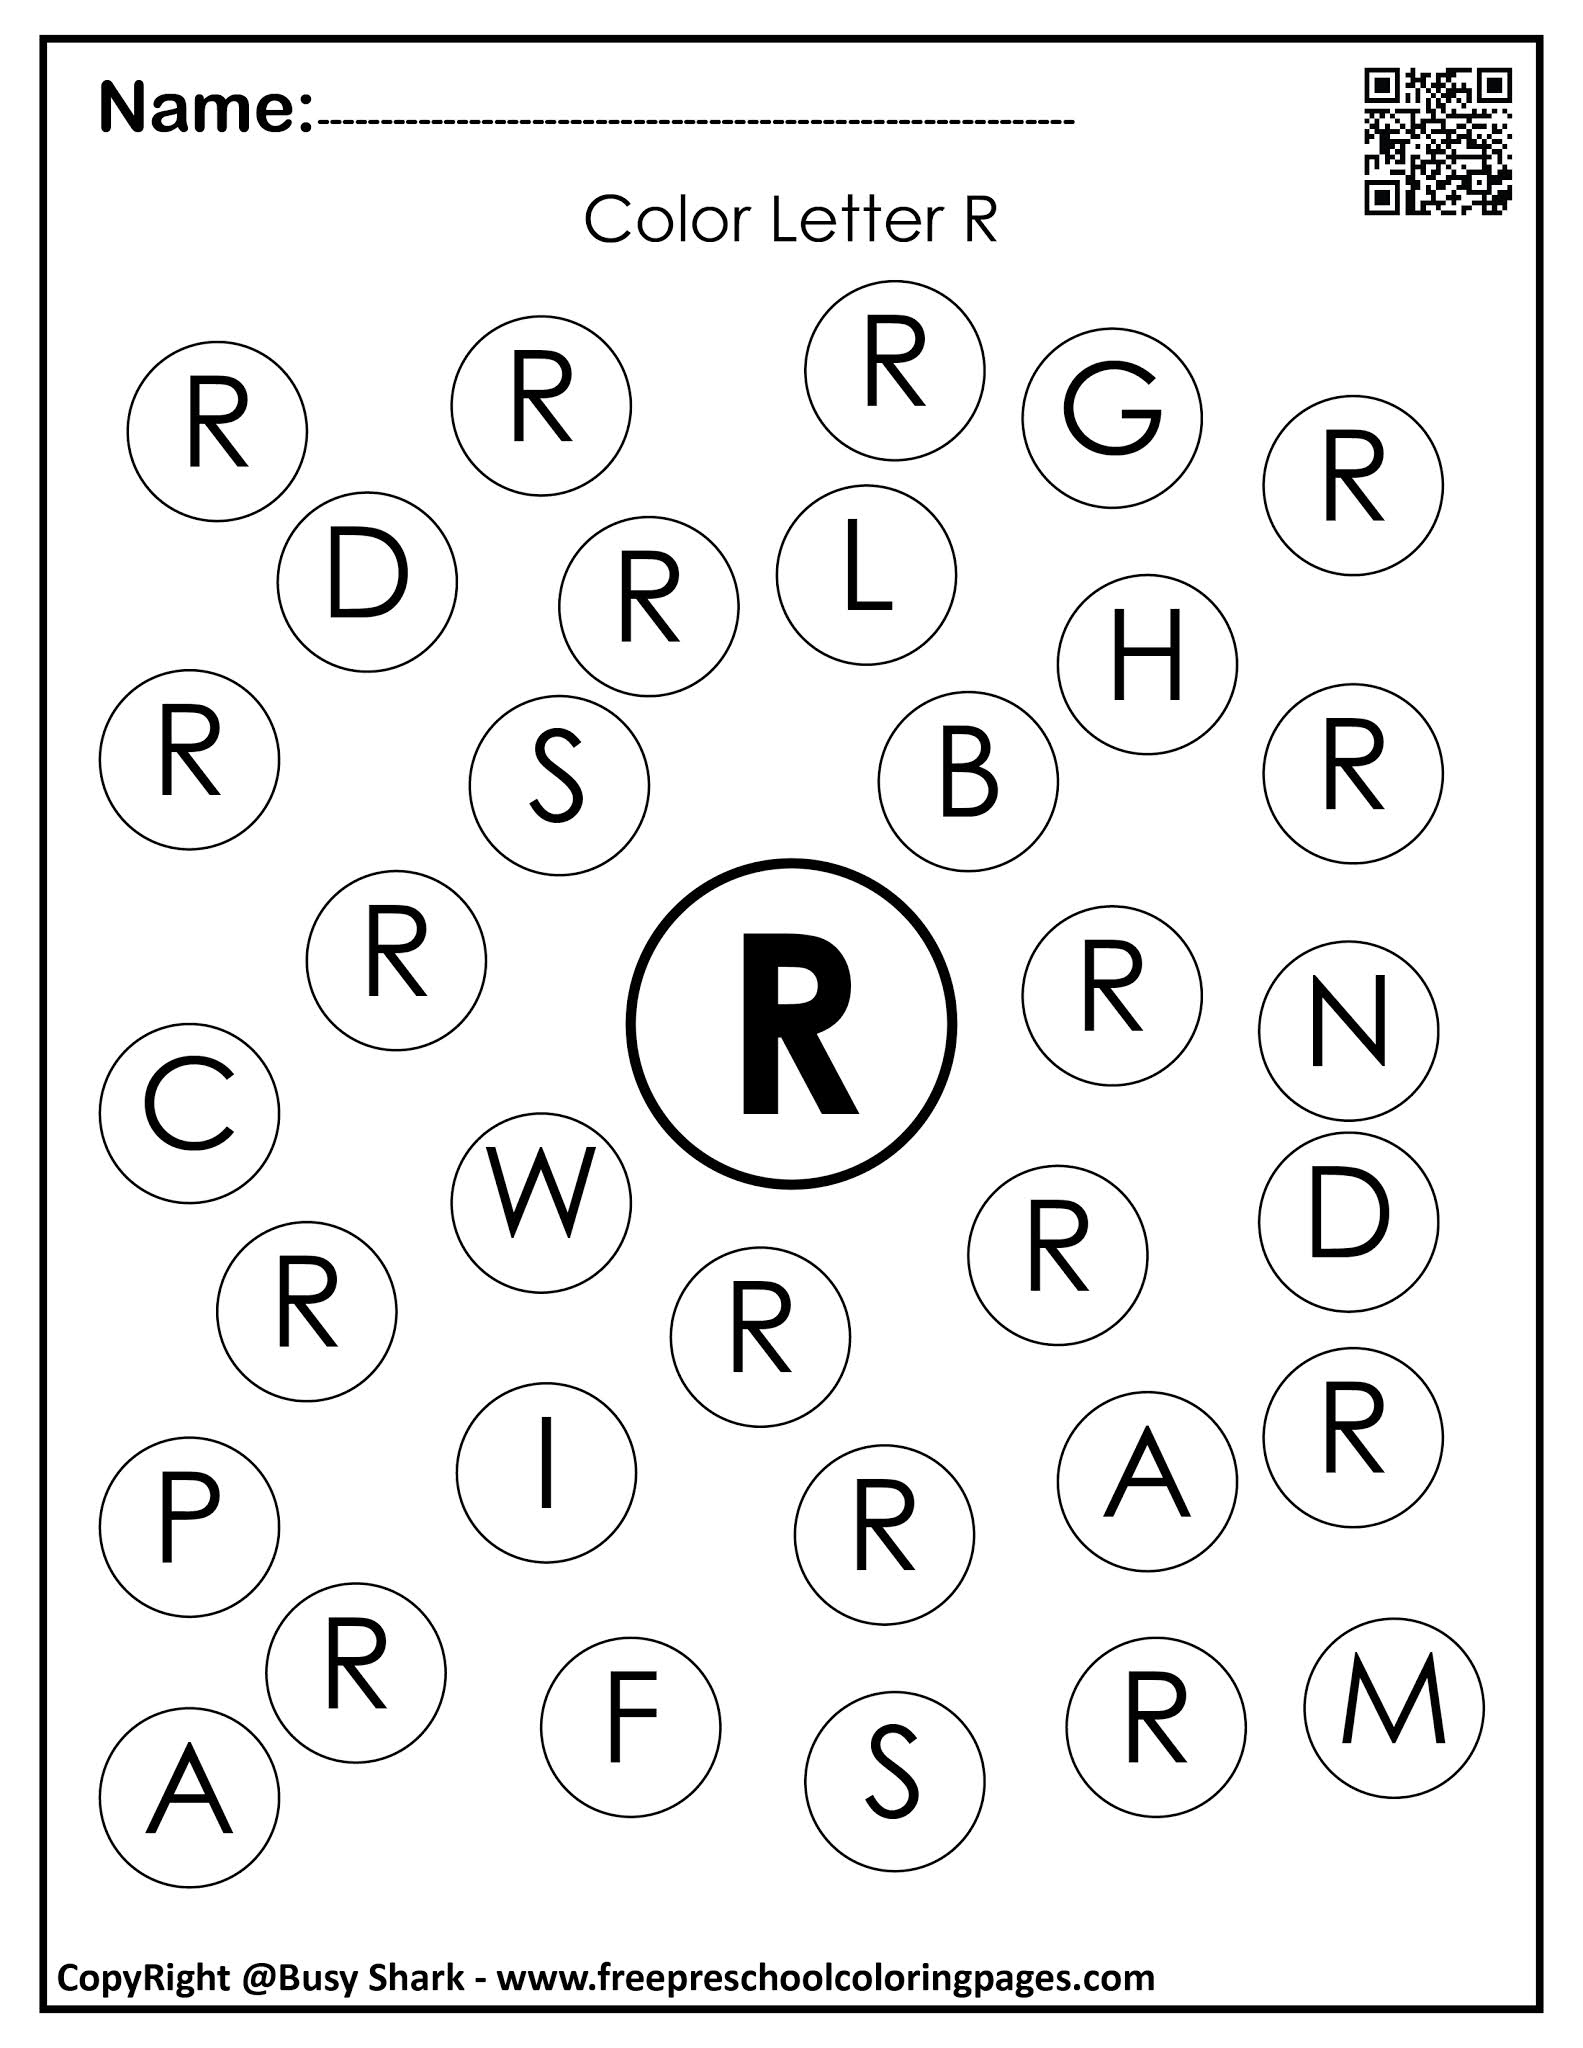 letter-r-10-free-dot-markers-coloring-pages